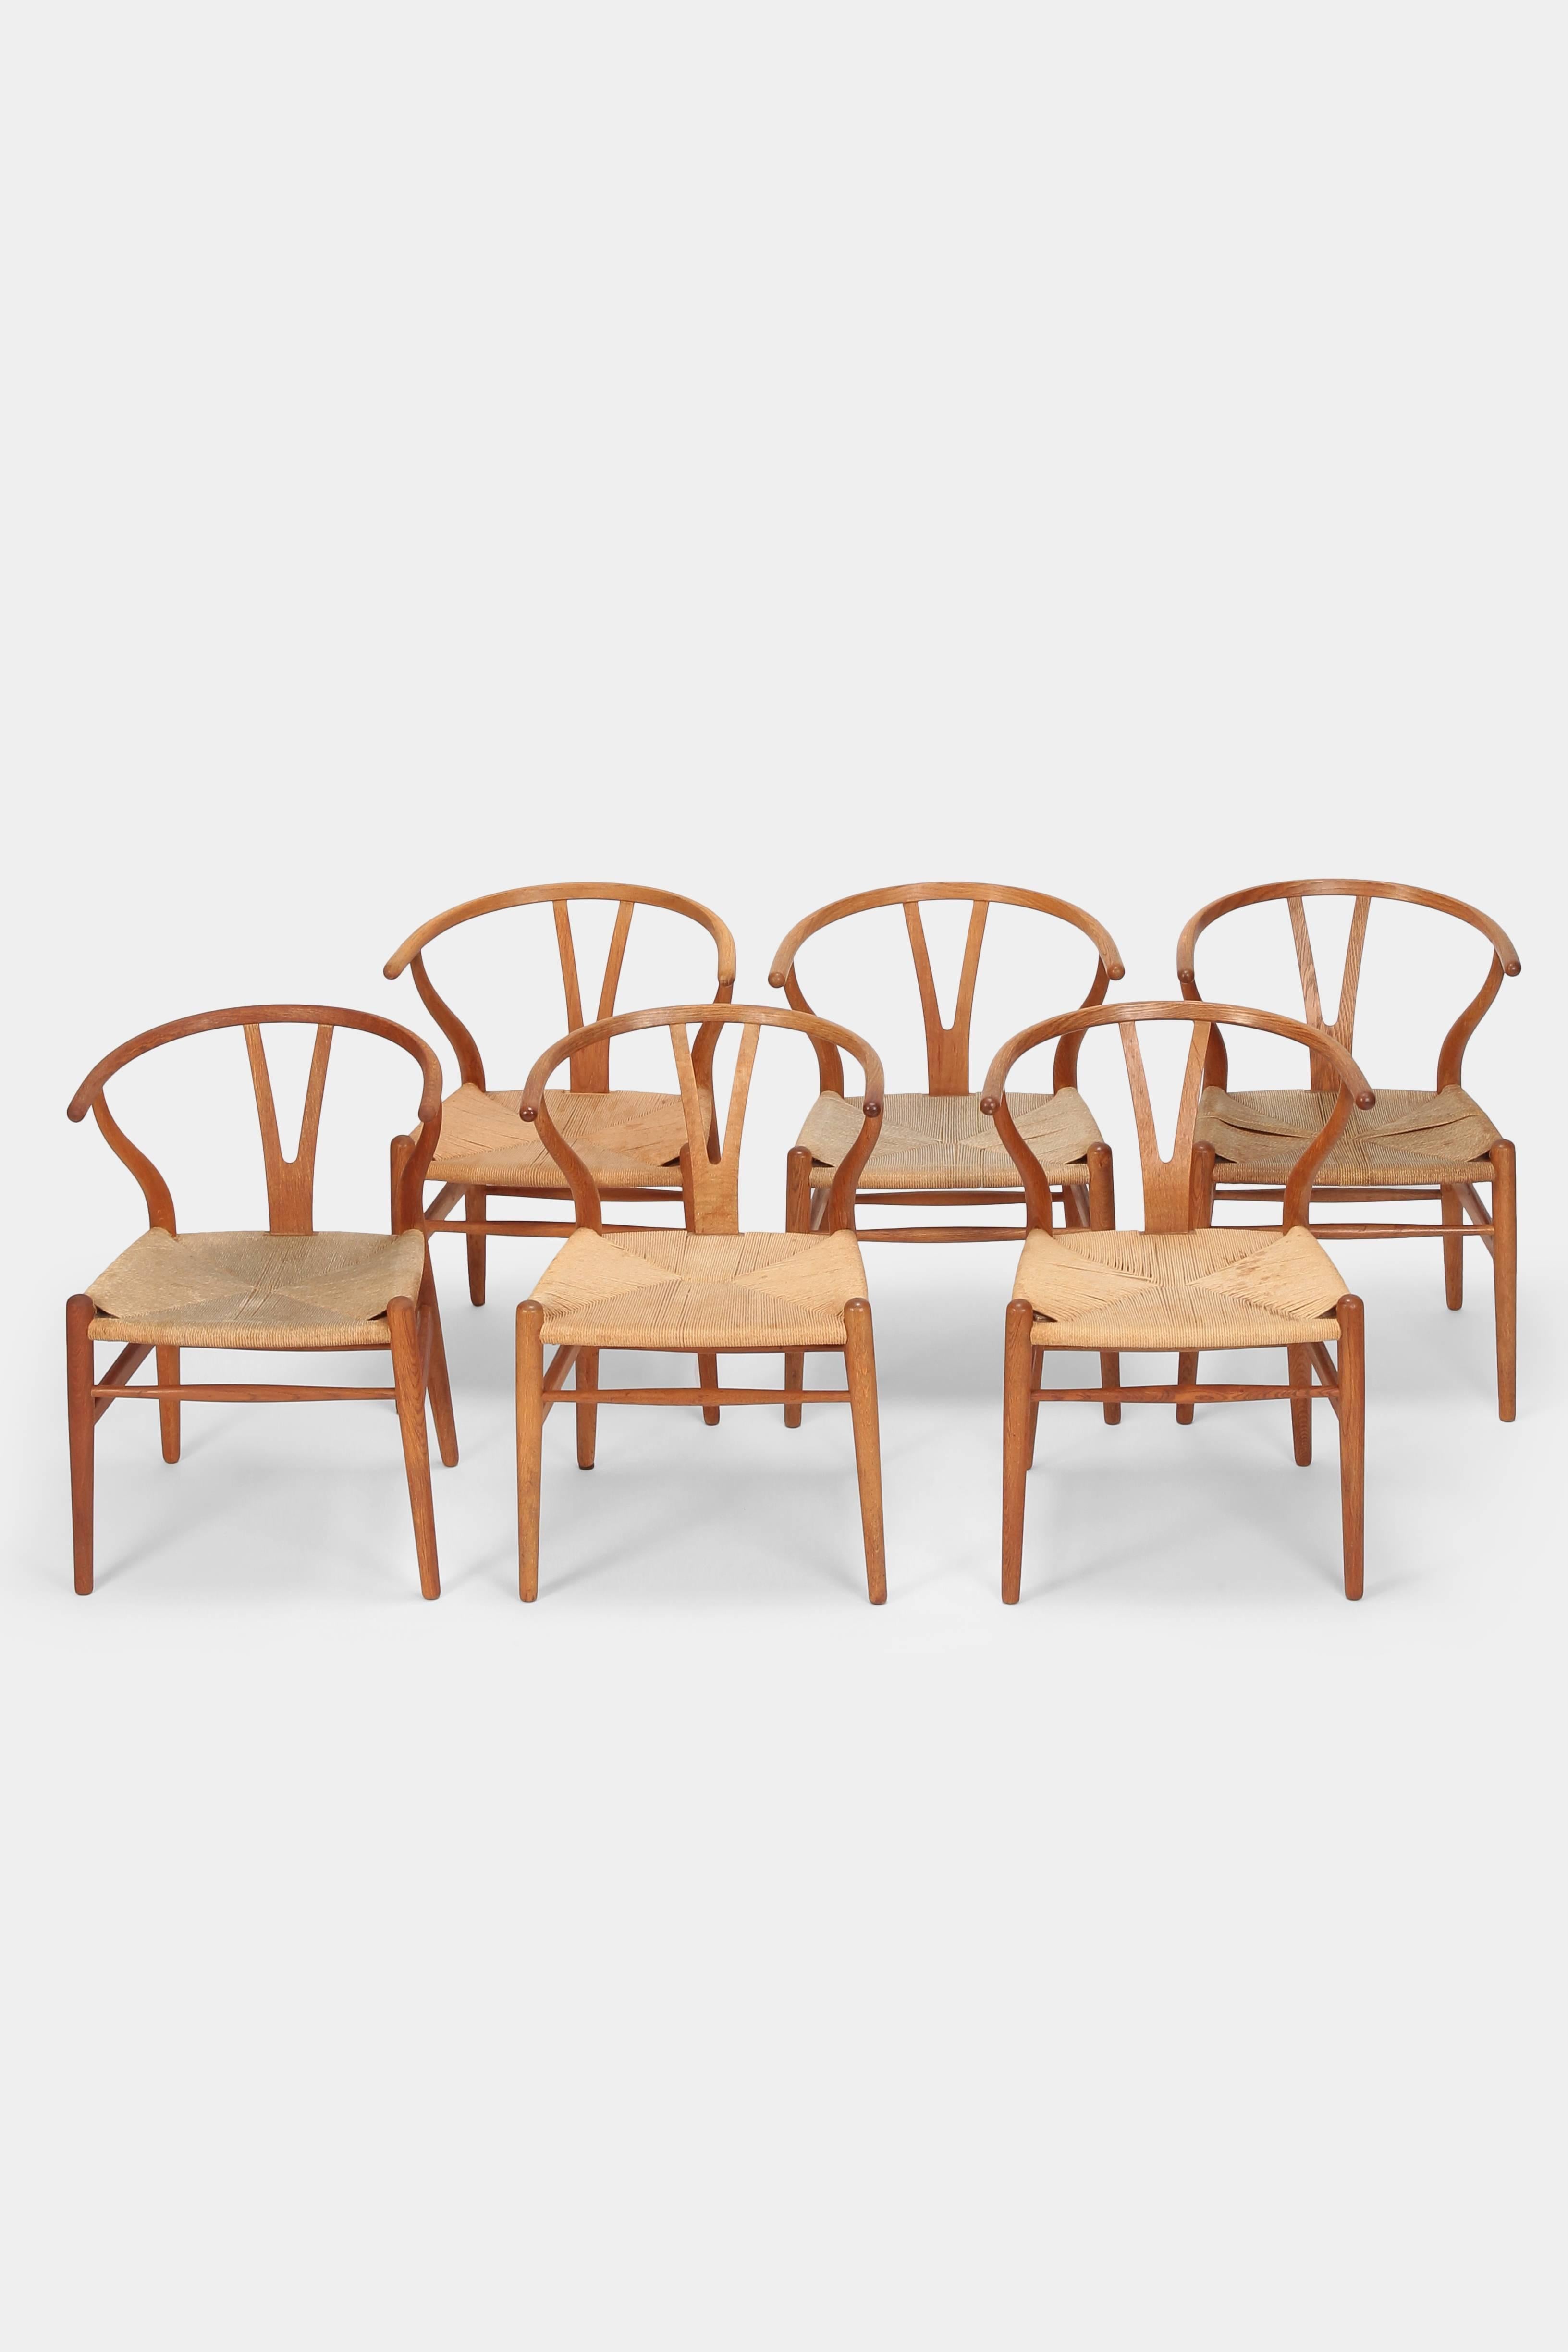 Hans J. Wegner “Y-Chairs” model CH24 manufactured by Carl Hansen & Son in the 1950s in Denmark. Six so called “Wishbone Chairs” with a solid oak wood frame and cord seats. Manufacturer stamp on the bottom. The seat of the chairs have different